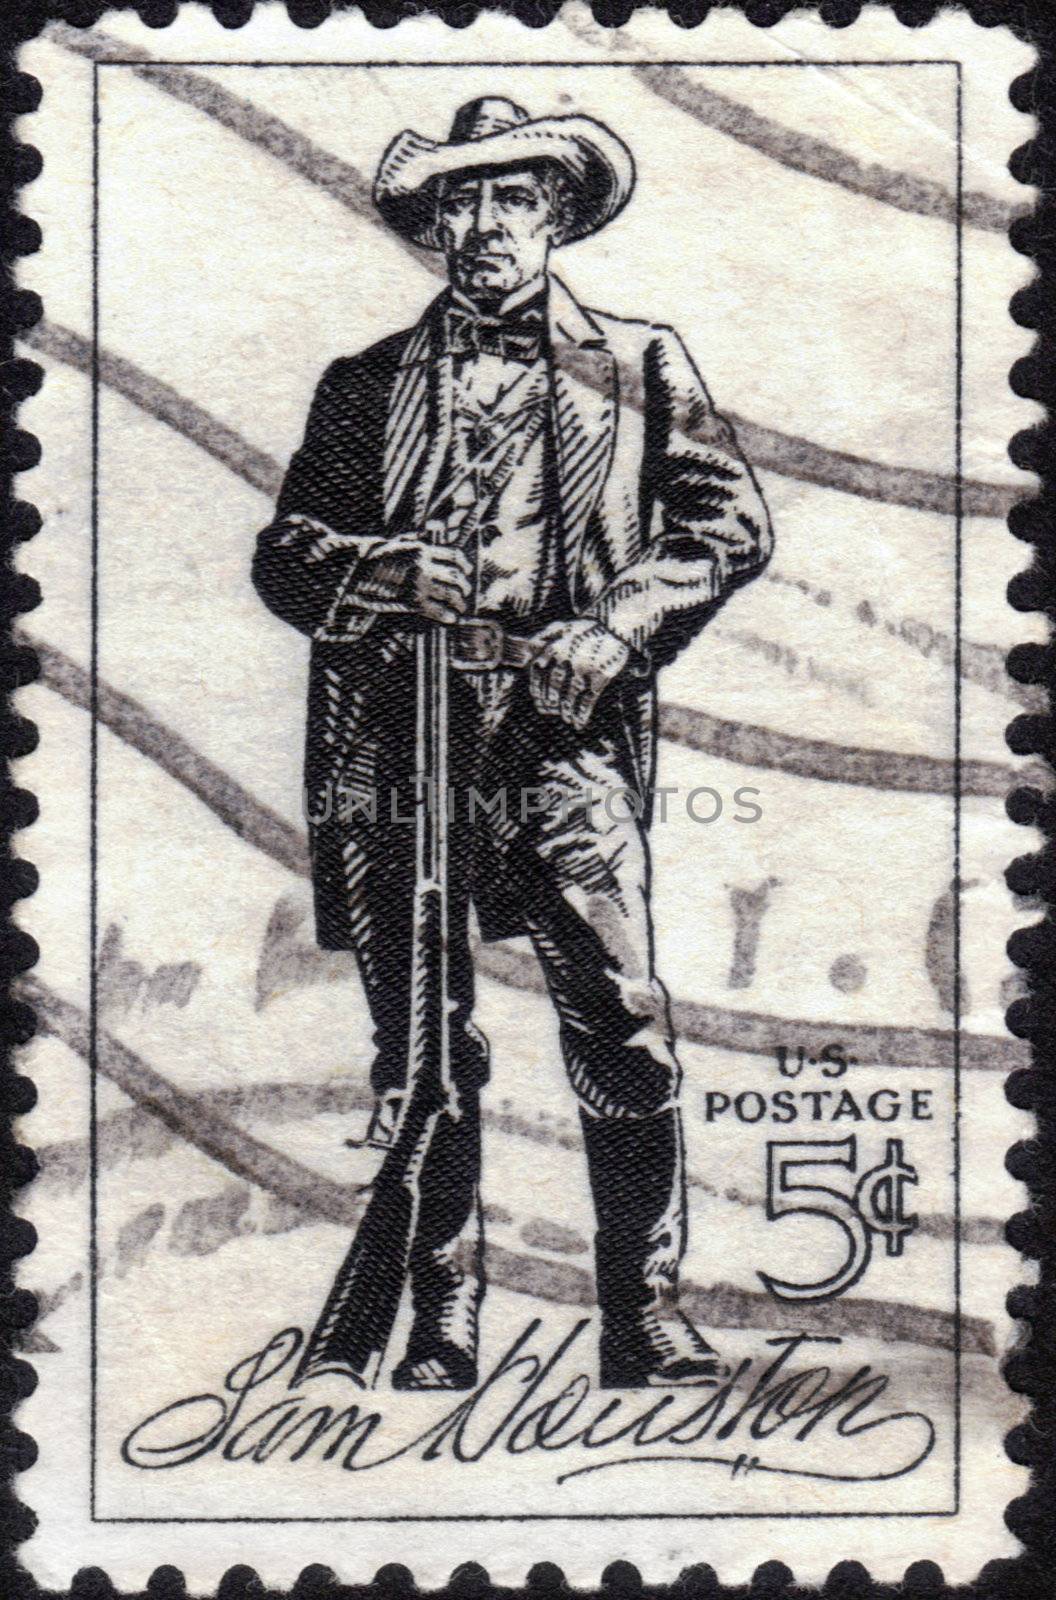 UNITED STATES - CIRCA 1964 : A stamp printed in United States. Sam Houston (1793-1863) was a soldier and first President of the Republic of Texas. United States - CIRCA 1964